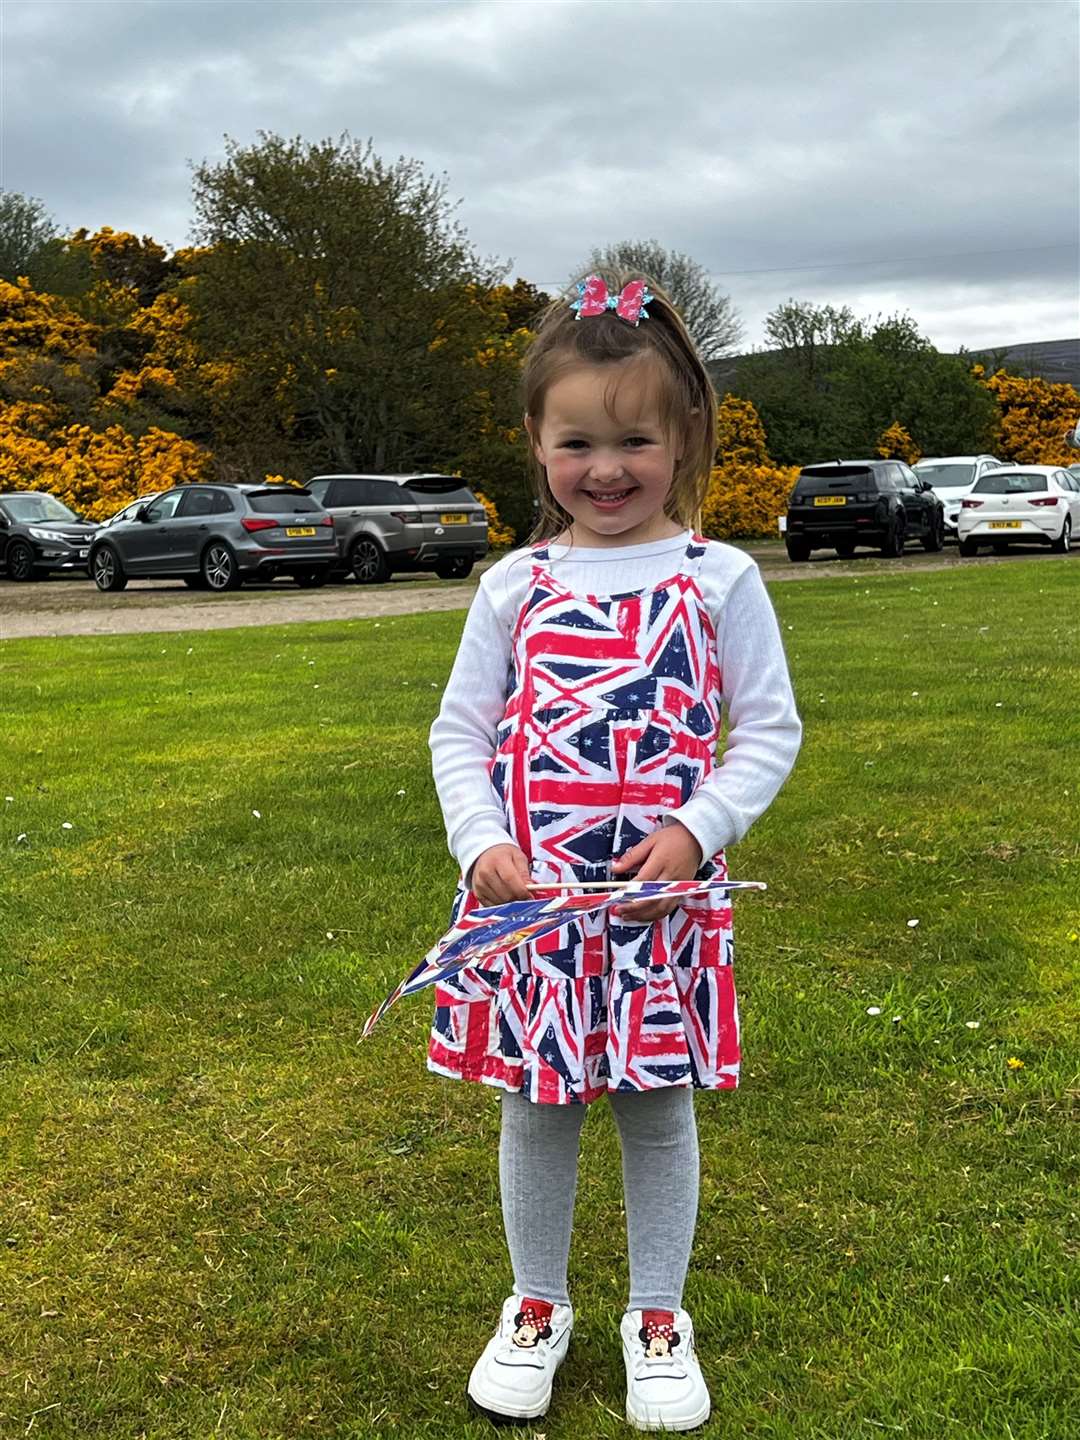 Little Harlee Booth, Brora, was at the village celebrations looking cute in her Union Jack dress and hair band.